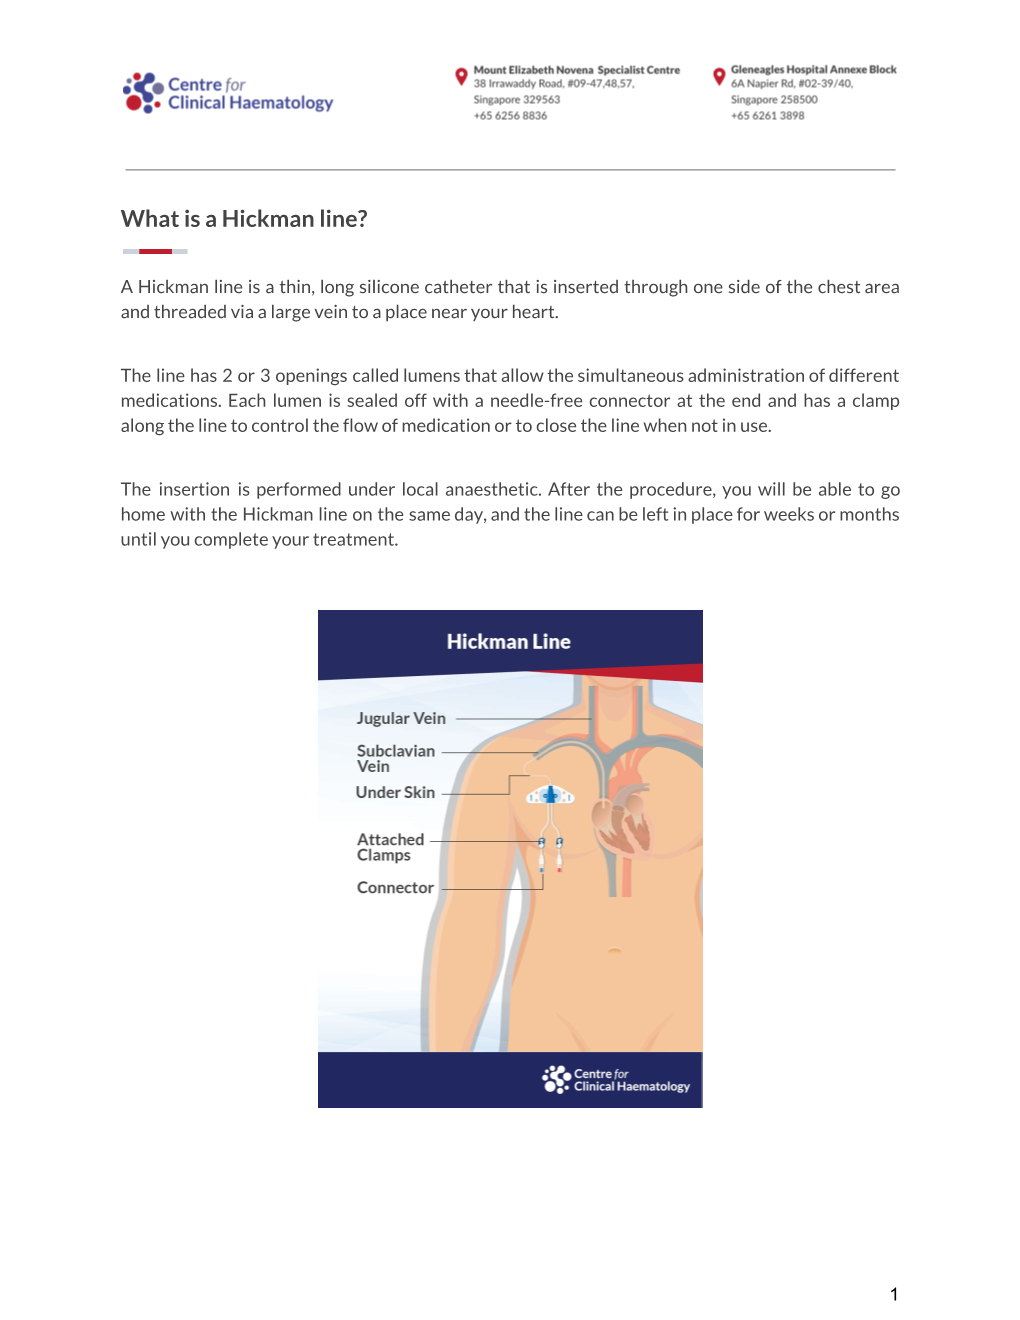 What Is a Hickman Line?